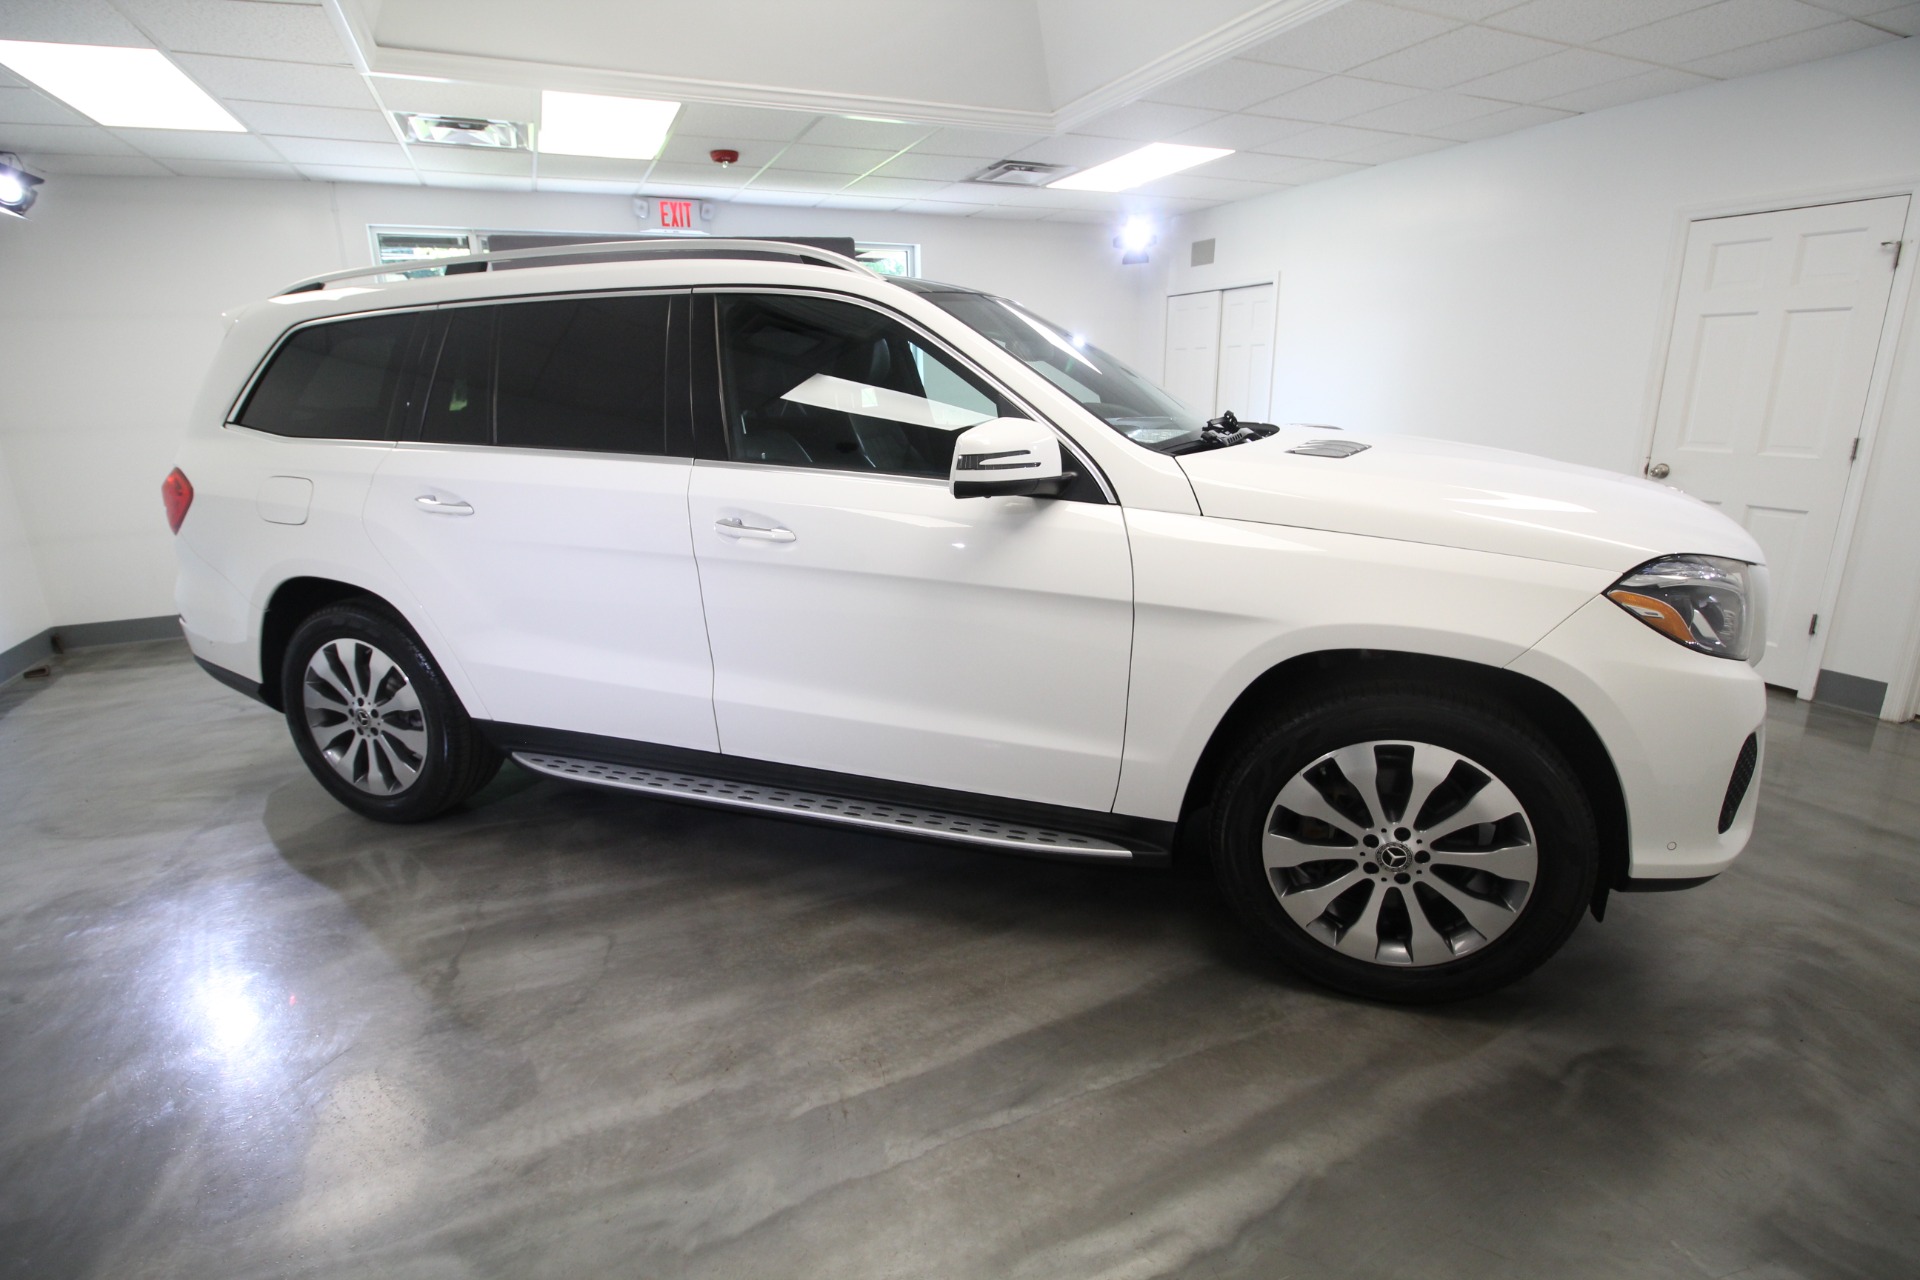 Used 2019 WHITE Mercedes-Benz GLS 450 4MATIC GLS 450 | Albany, NY